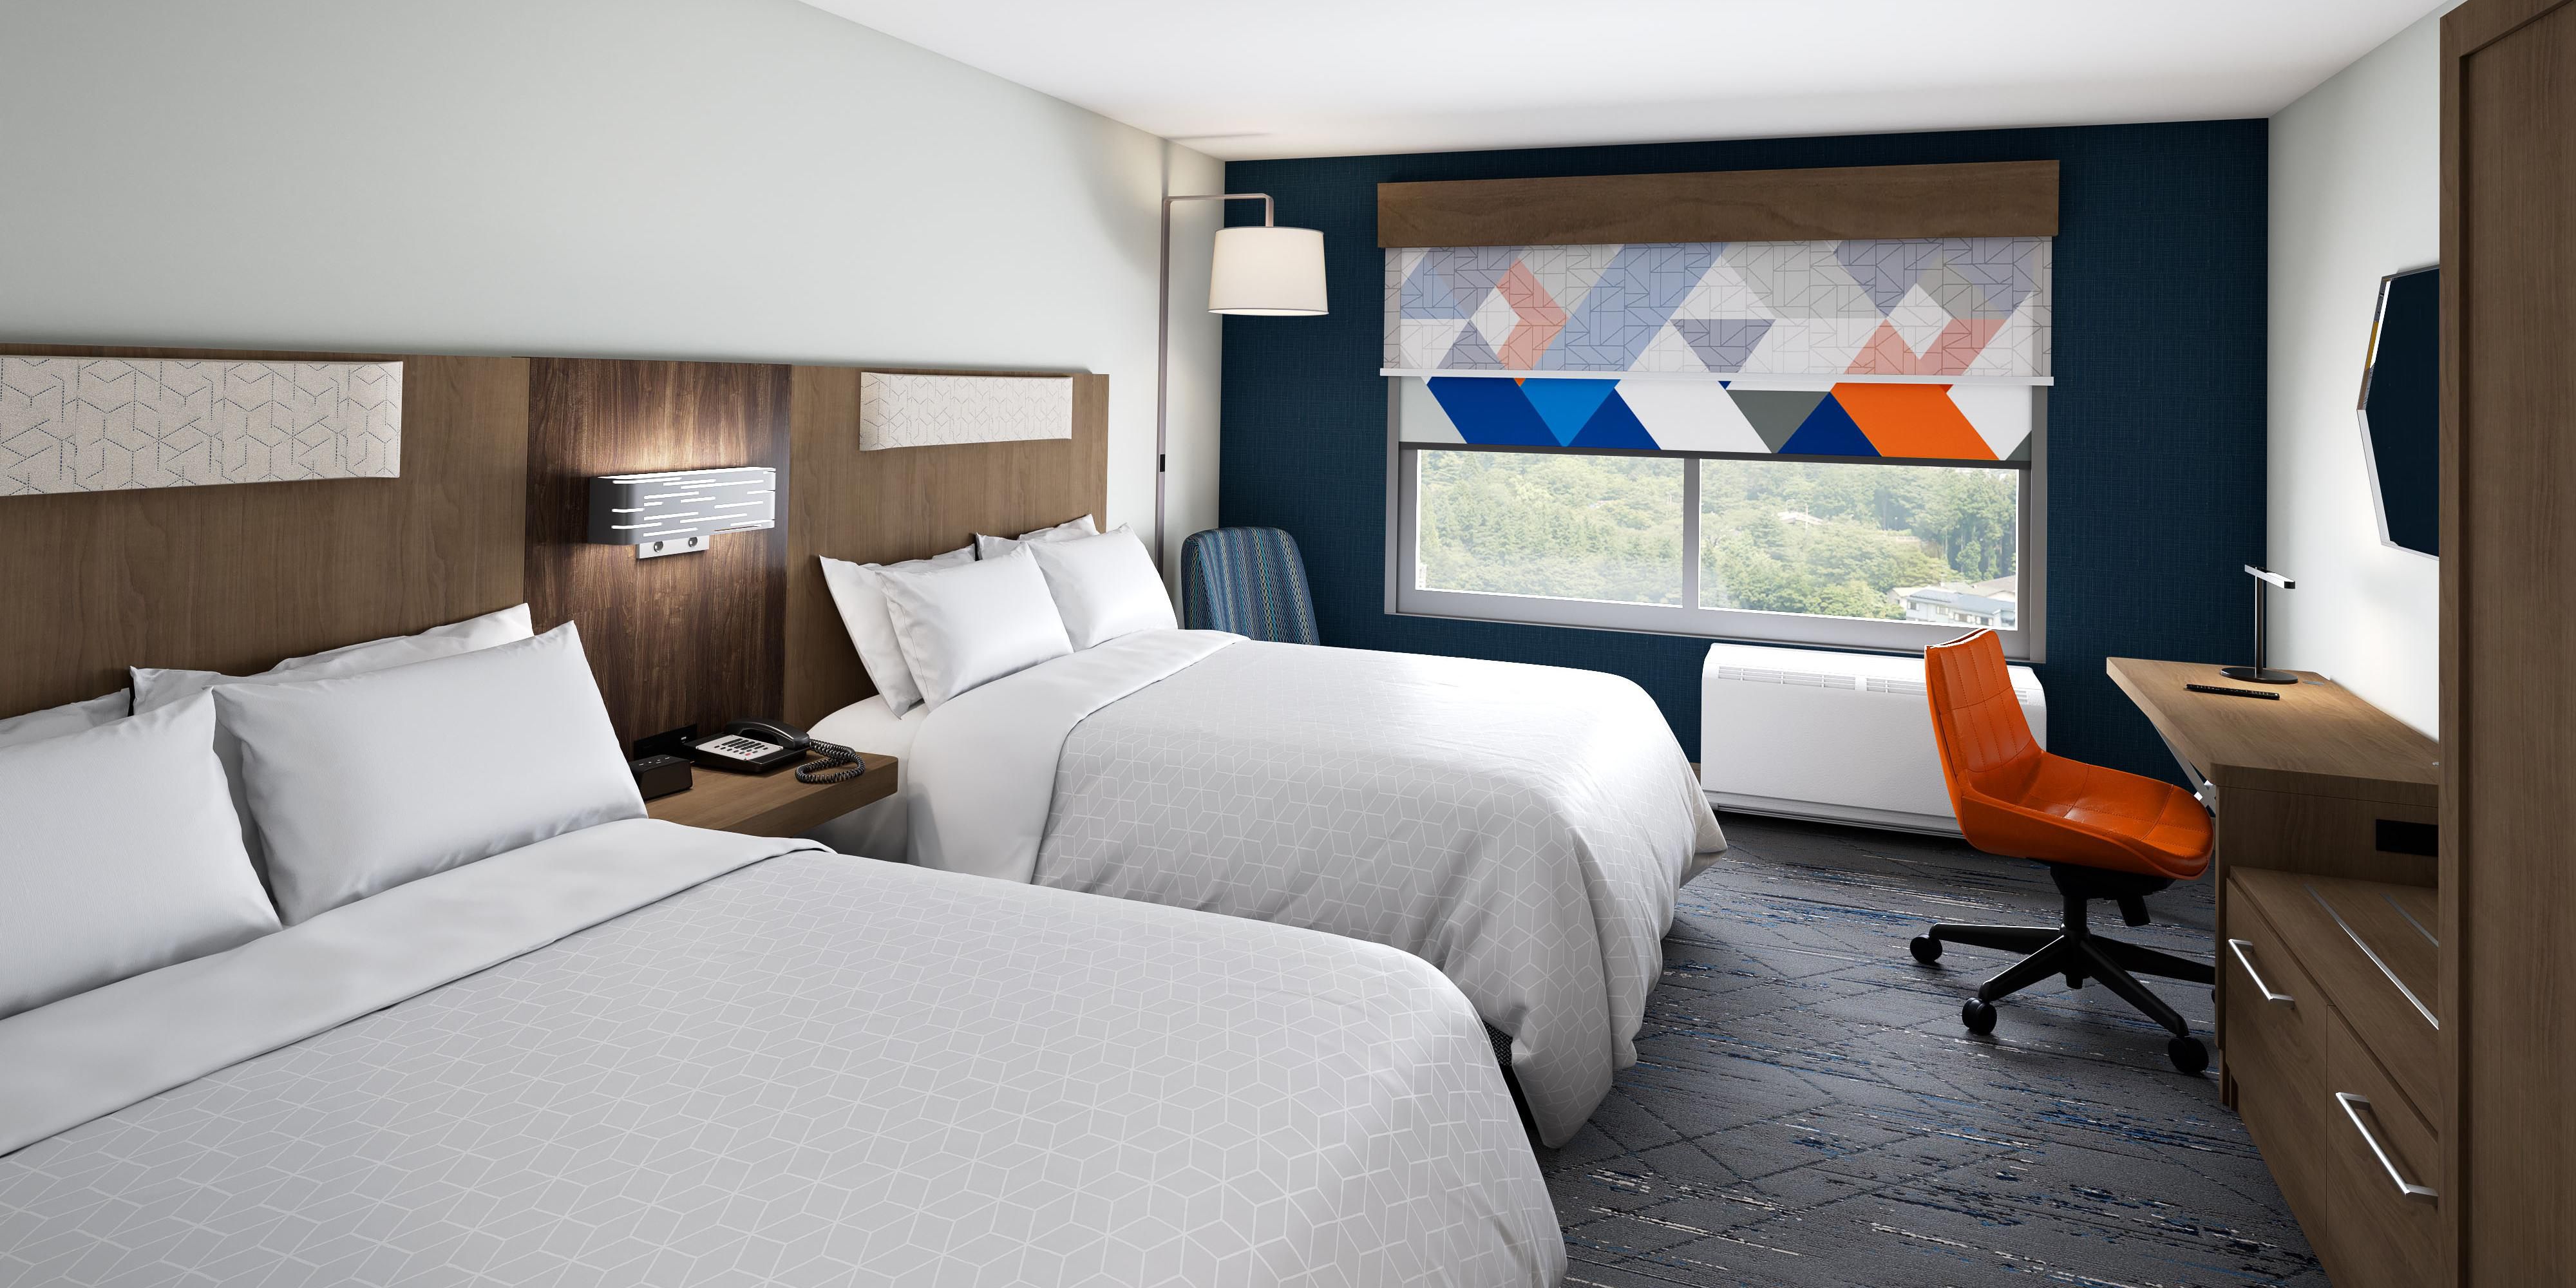 With true double queen beds, your family has plenty of room to get a great night's sleep. Perfect for sports team travel, our spacious rooms provide plenty of space to get geared up for the big game.